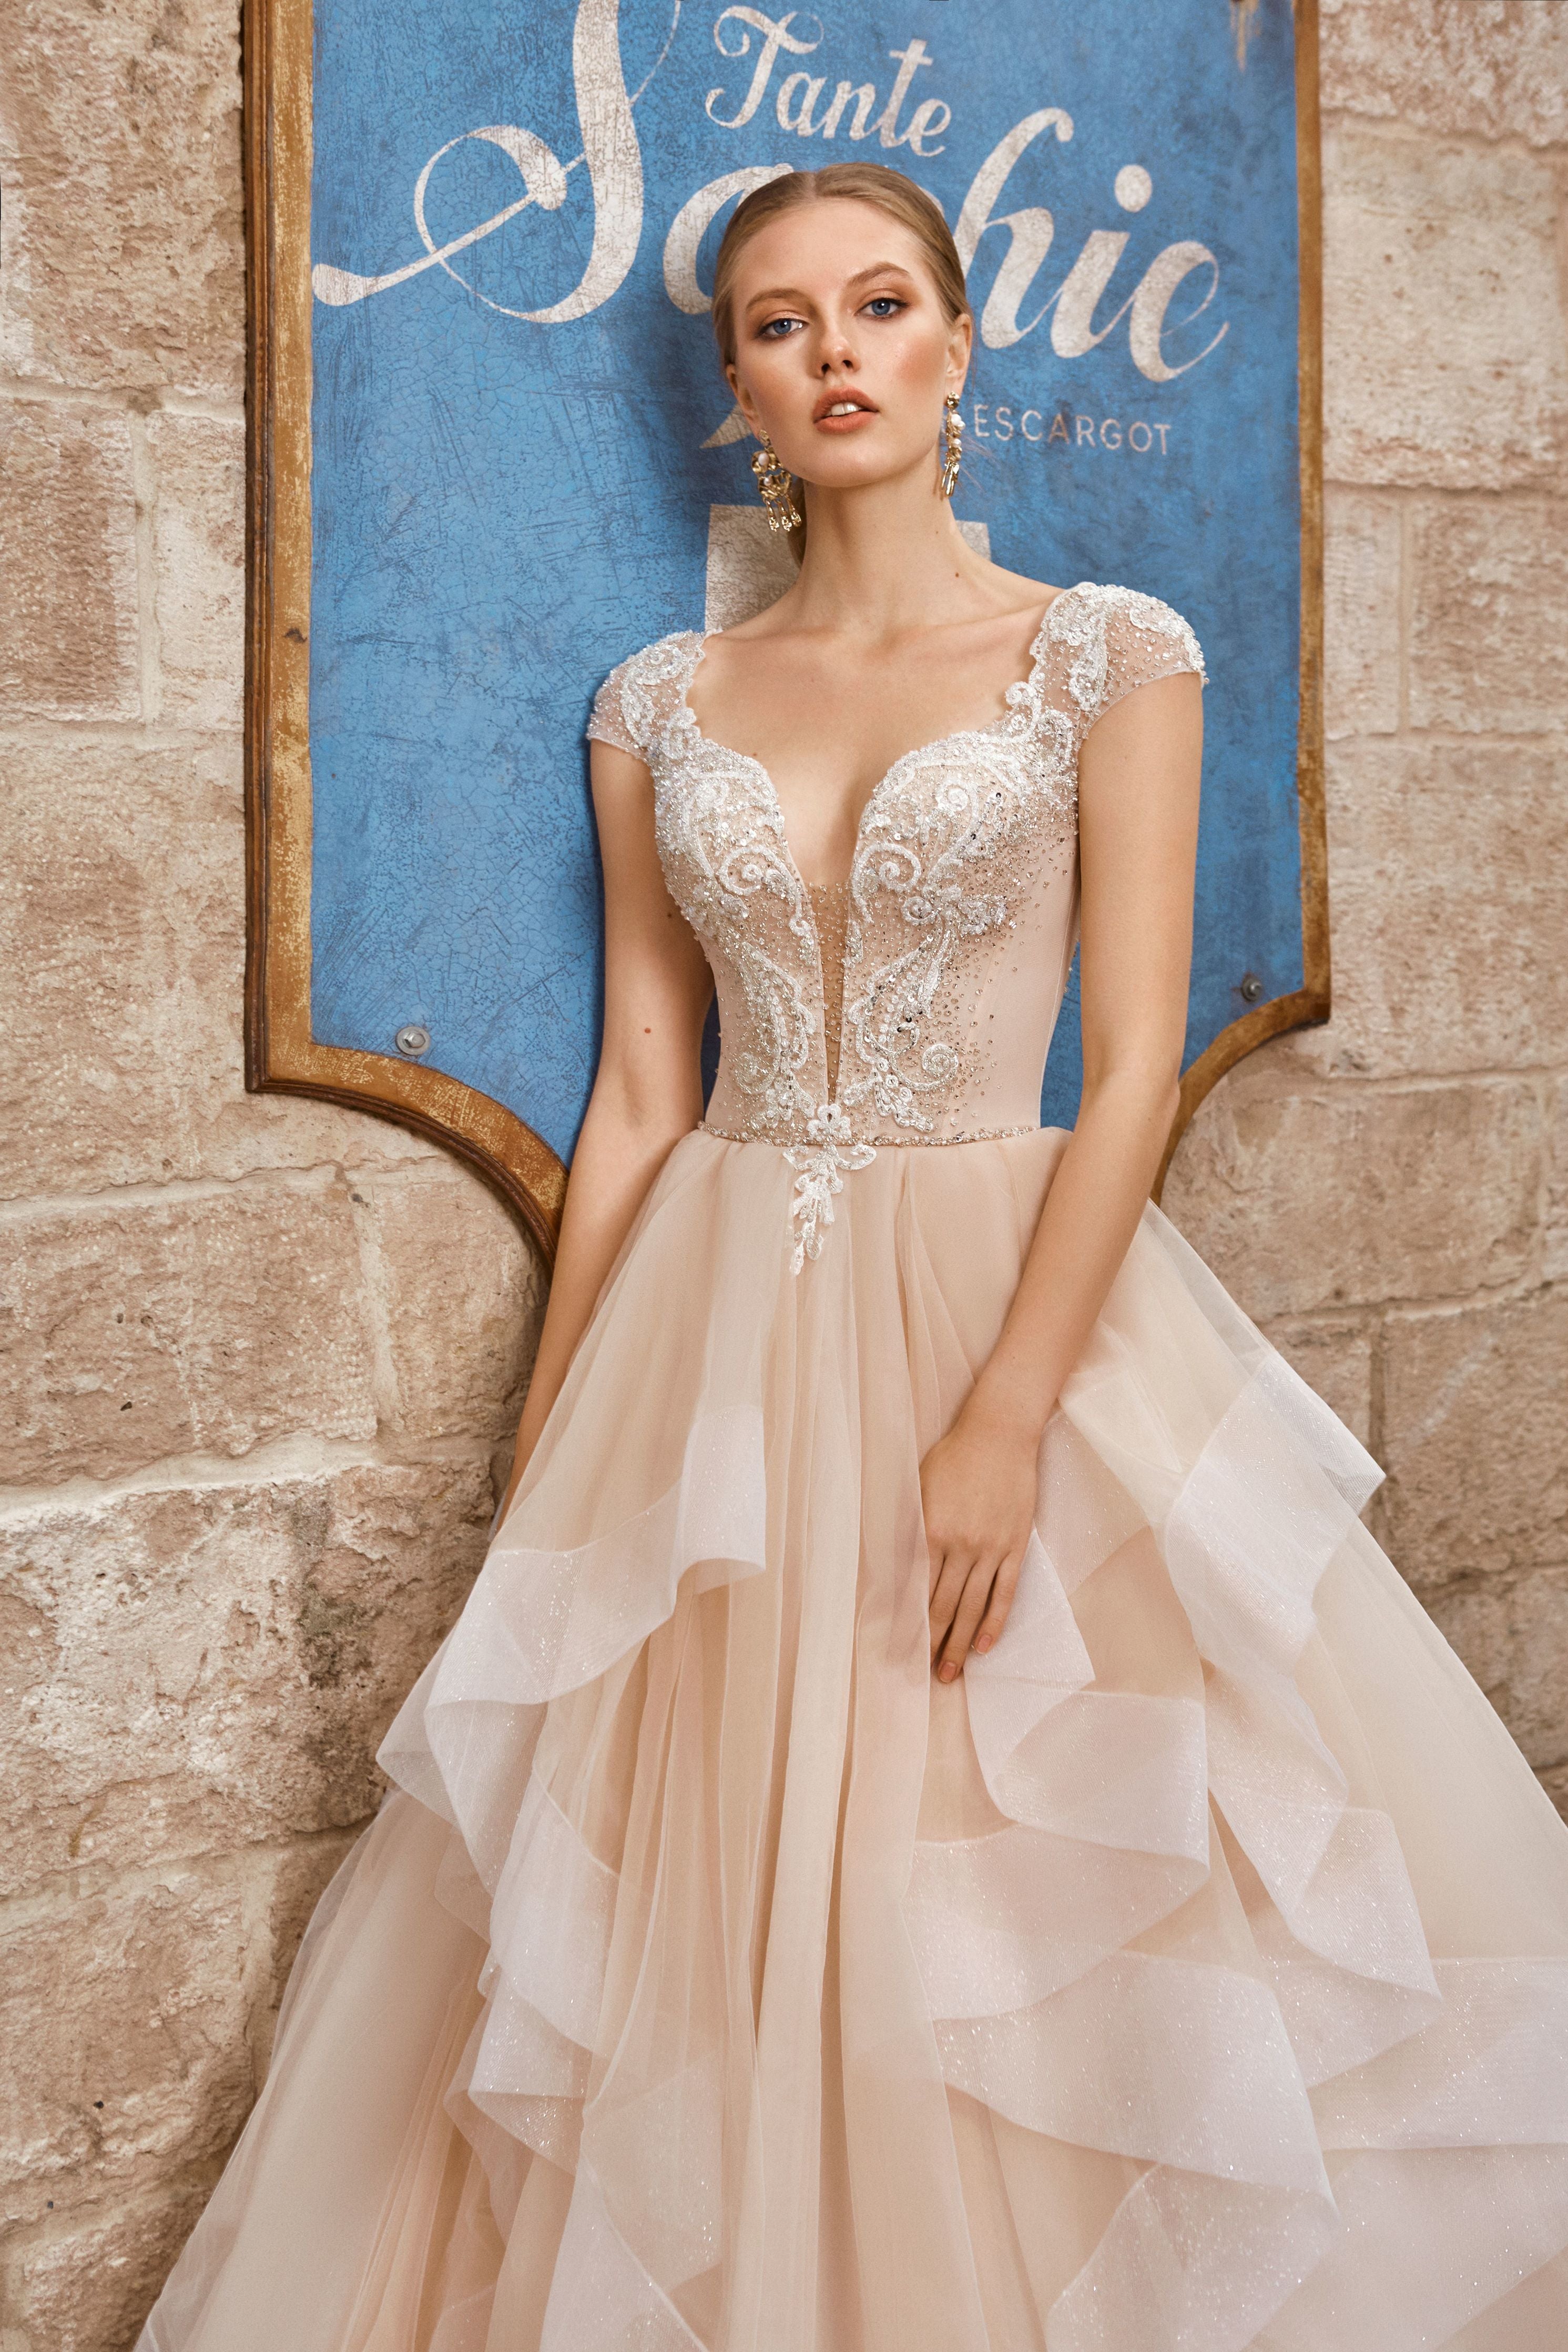 Sophie - Ruffled Skirt Ball Gown with Sweetheart Neckline